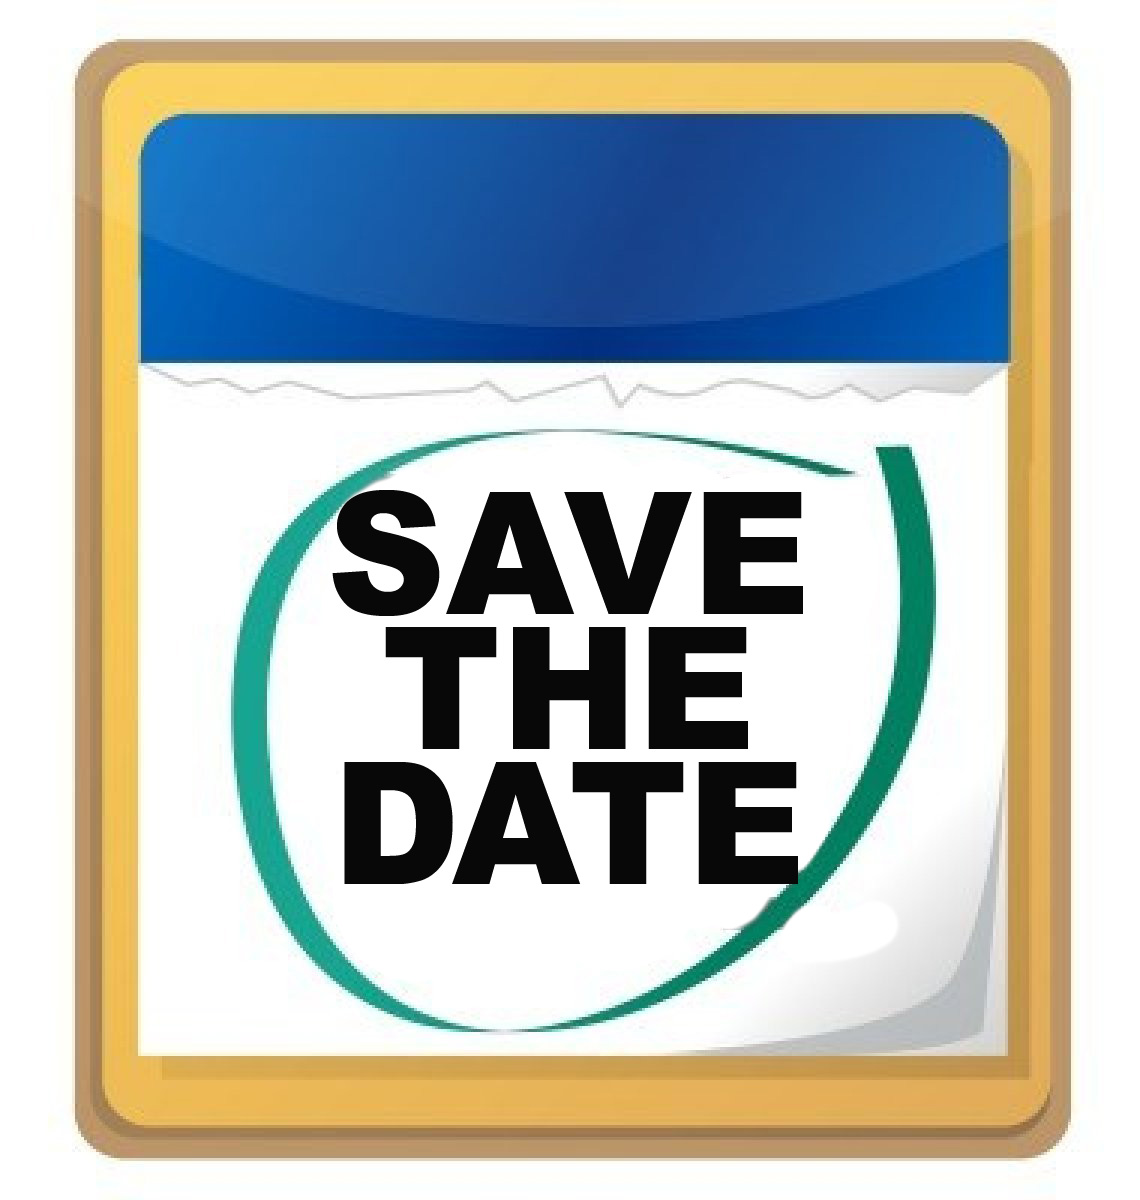 Save the date clipart clipart